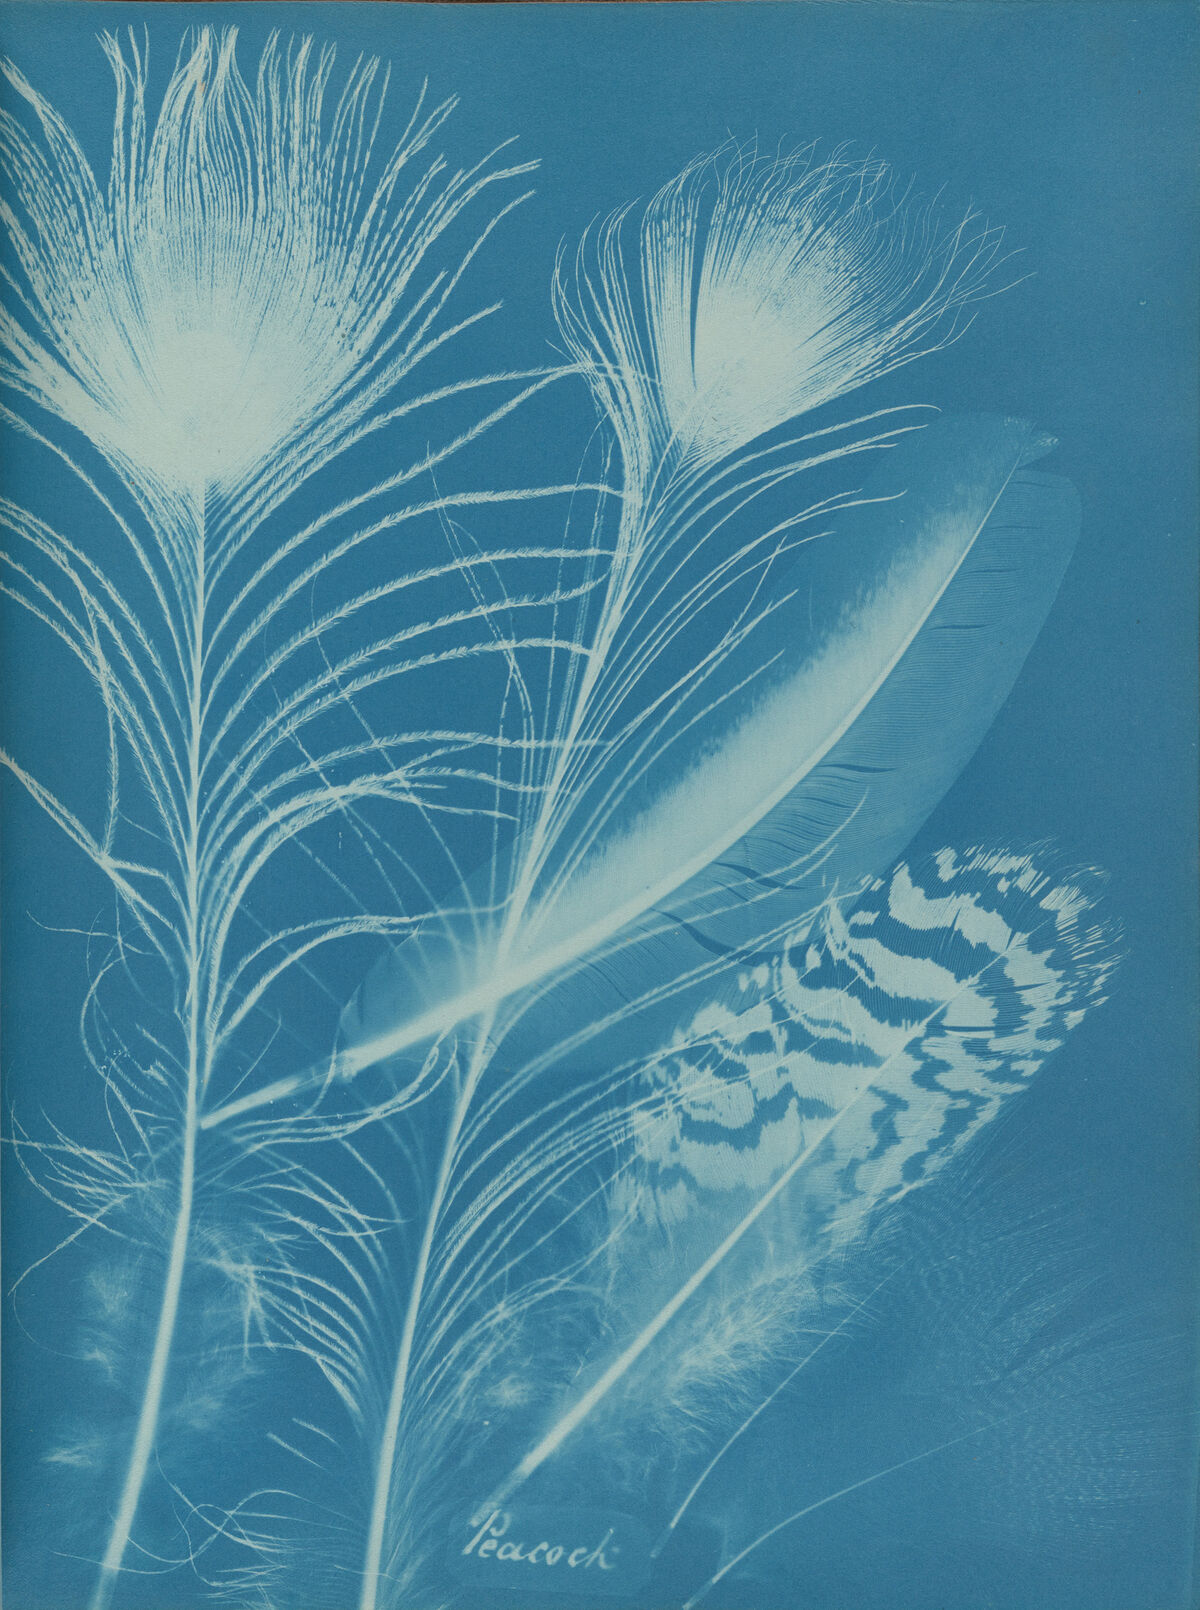 Anna Atkins and Anne Dixon, Peacock, 1861. Private collection. Courtesy of Hans P. Kraus, Jr.